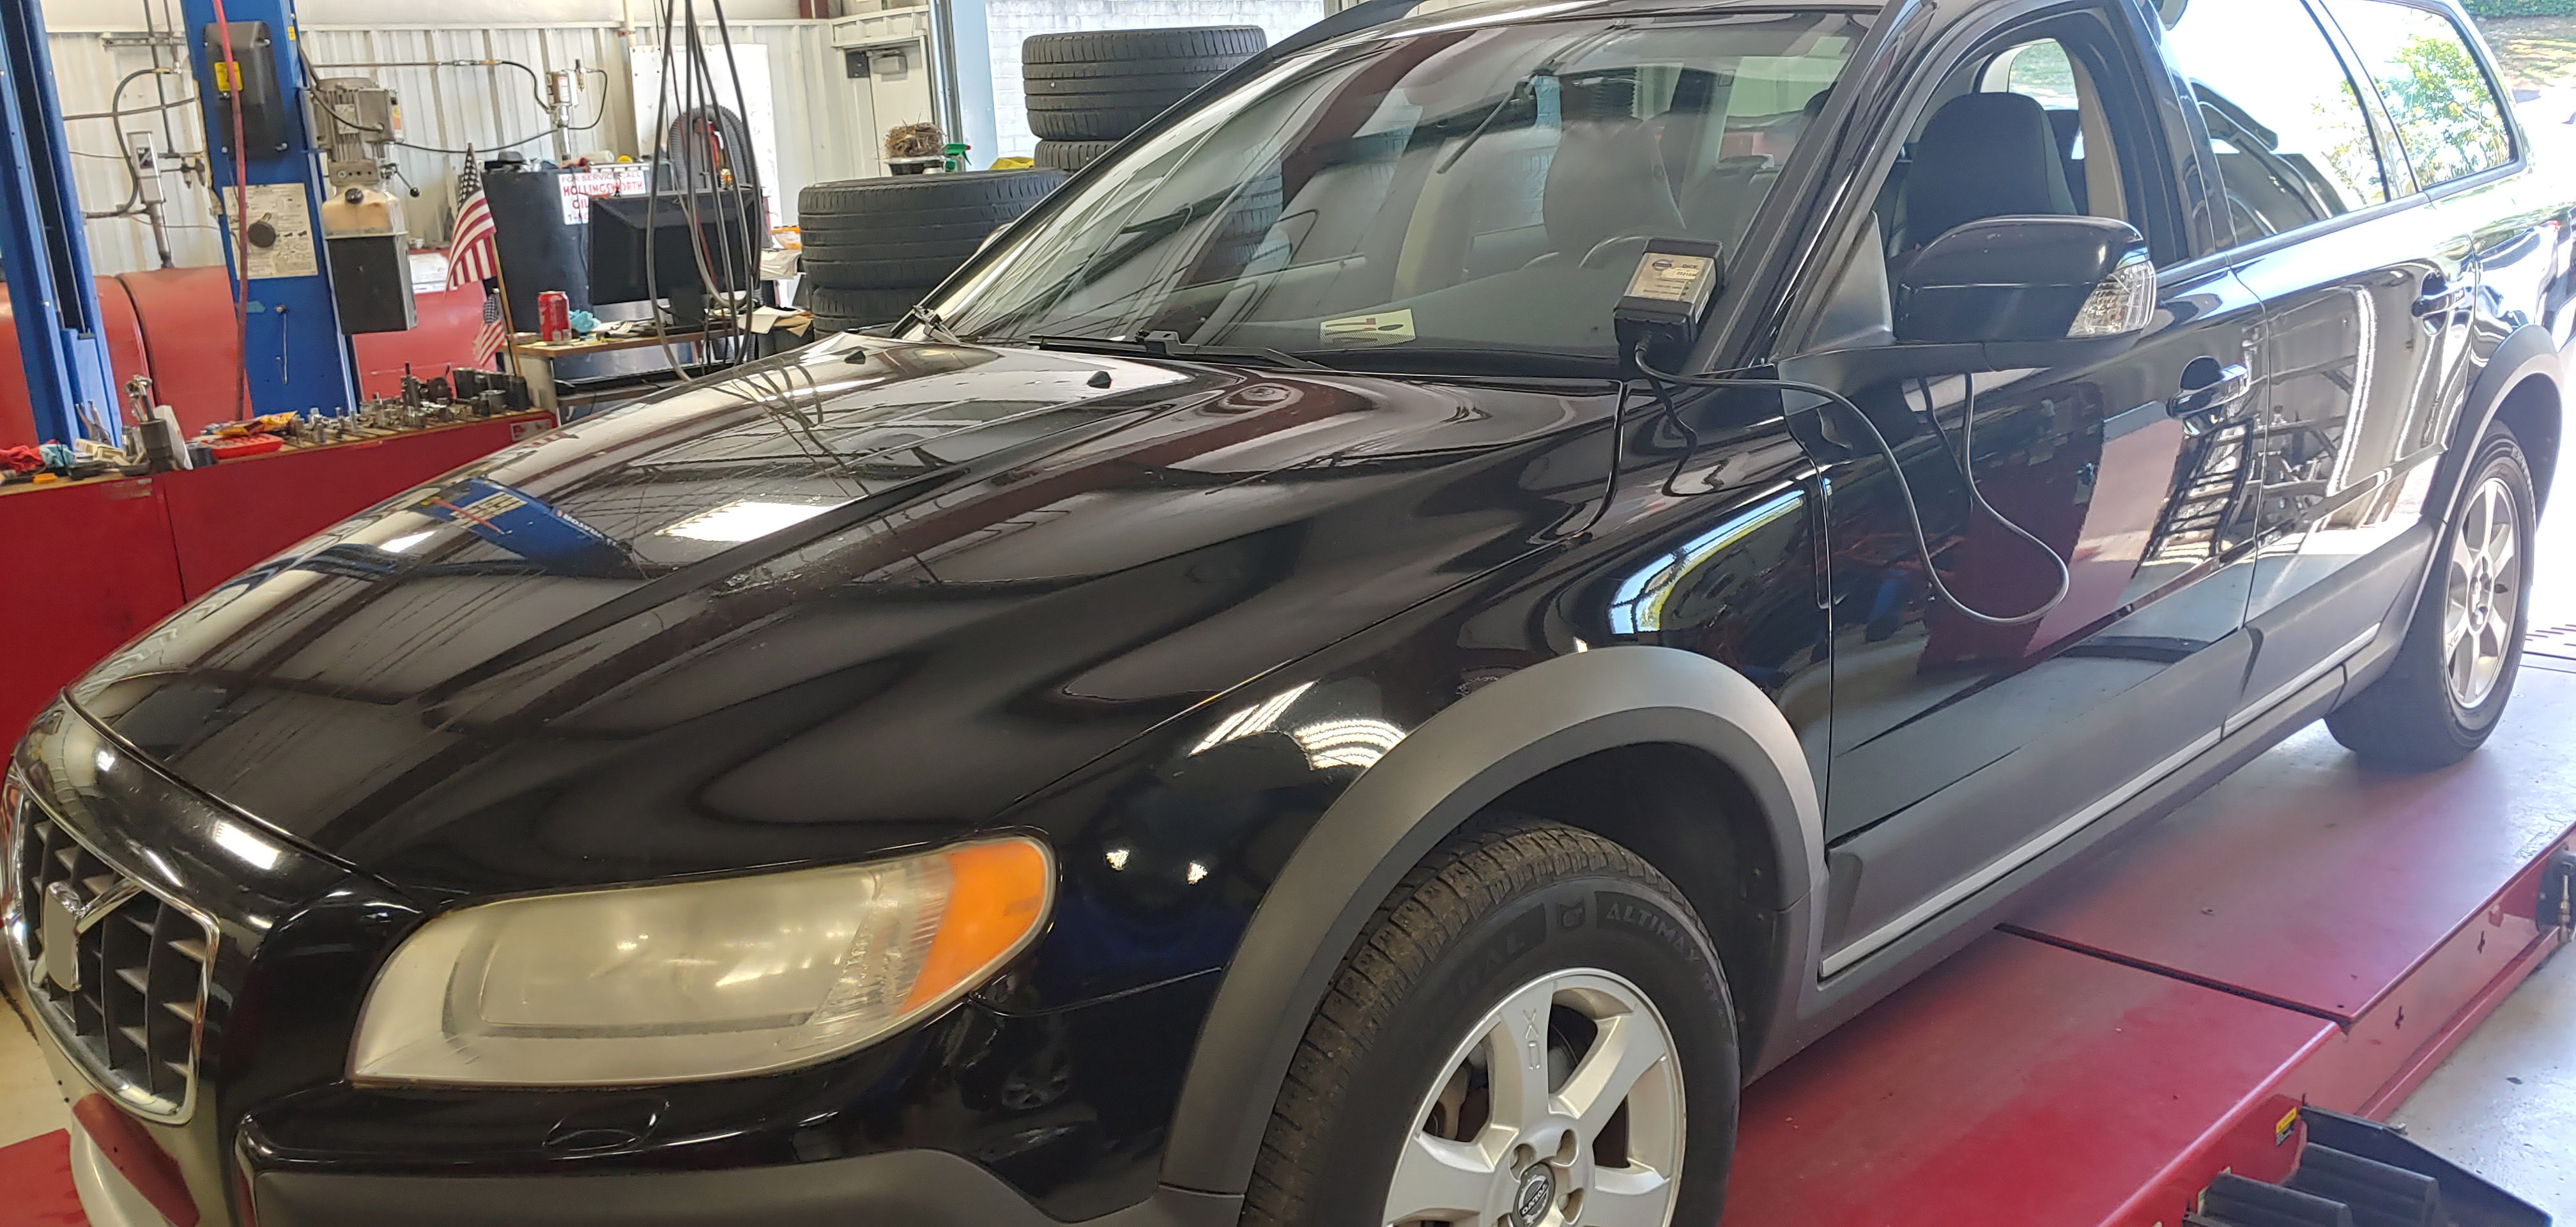 Black Volvo XC70 Inside Our Garage for Repair